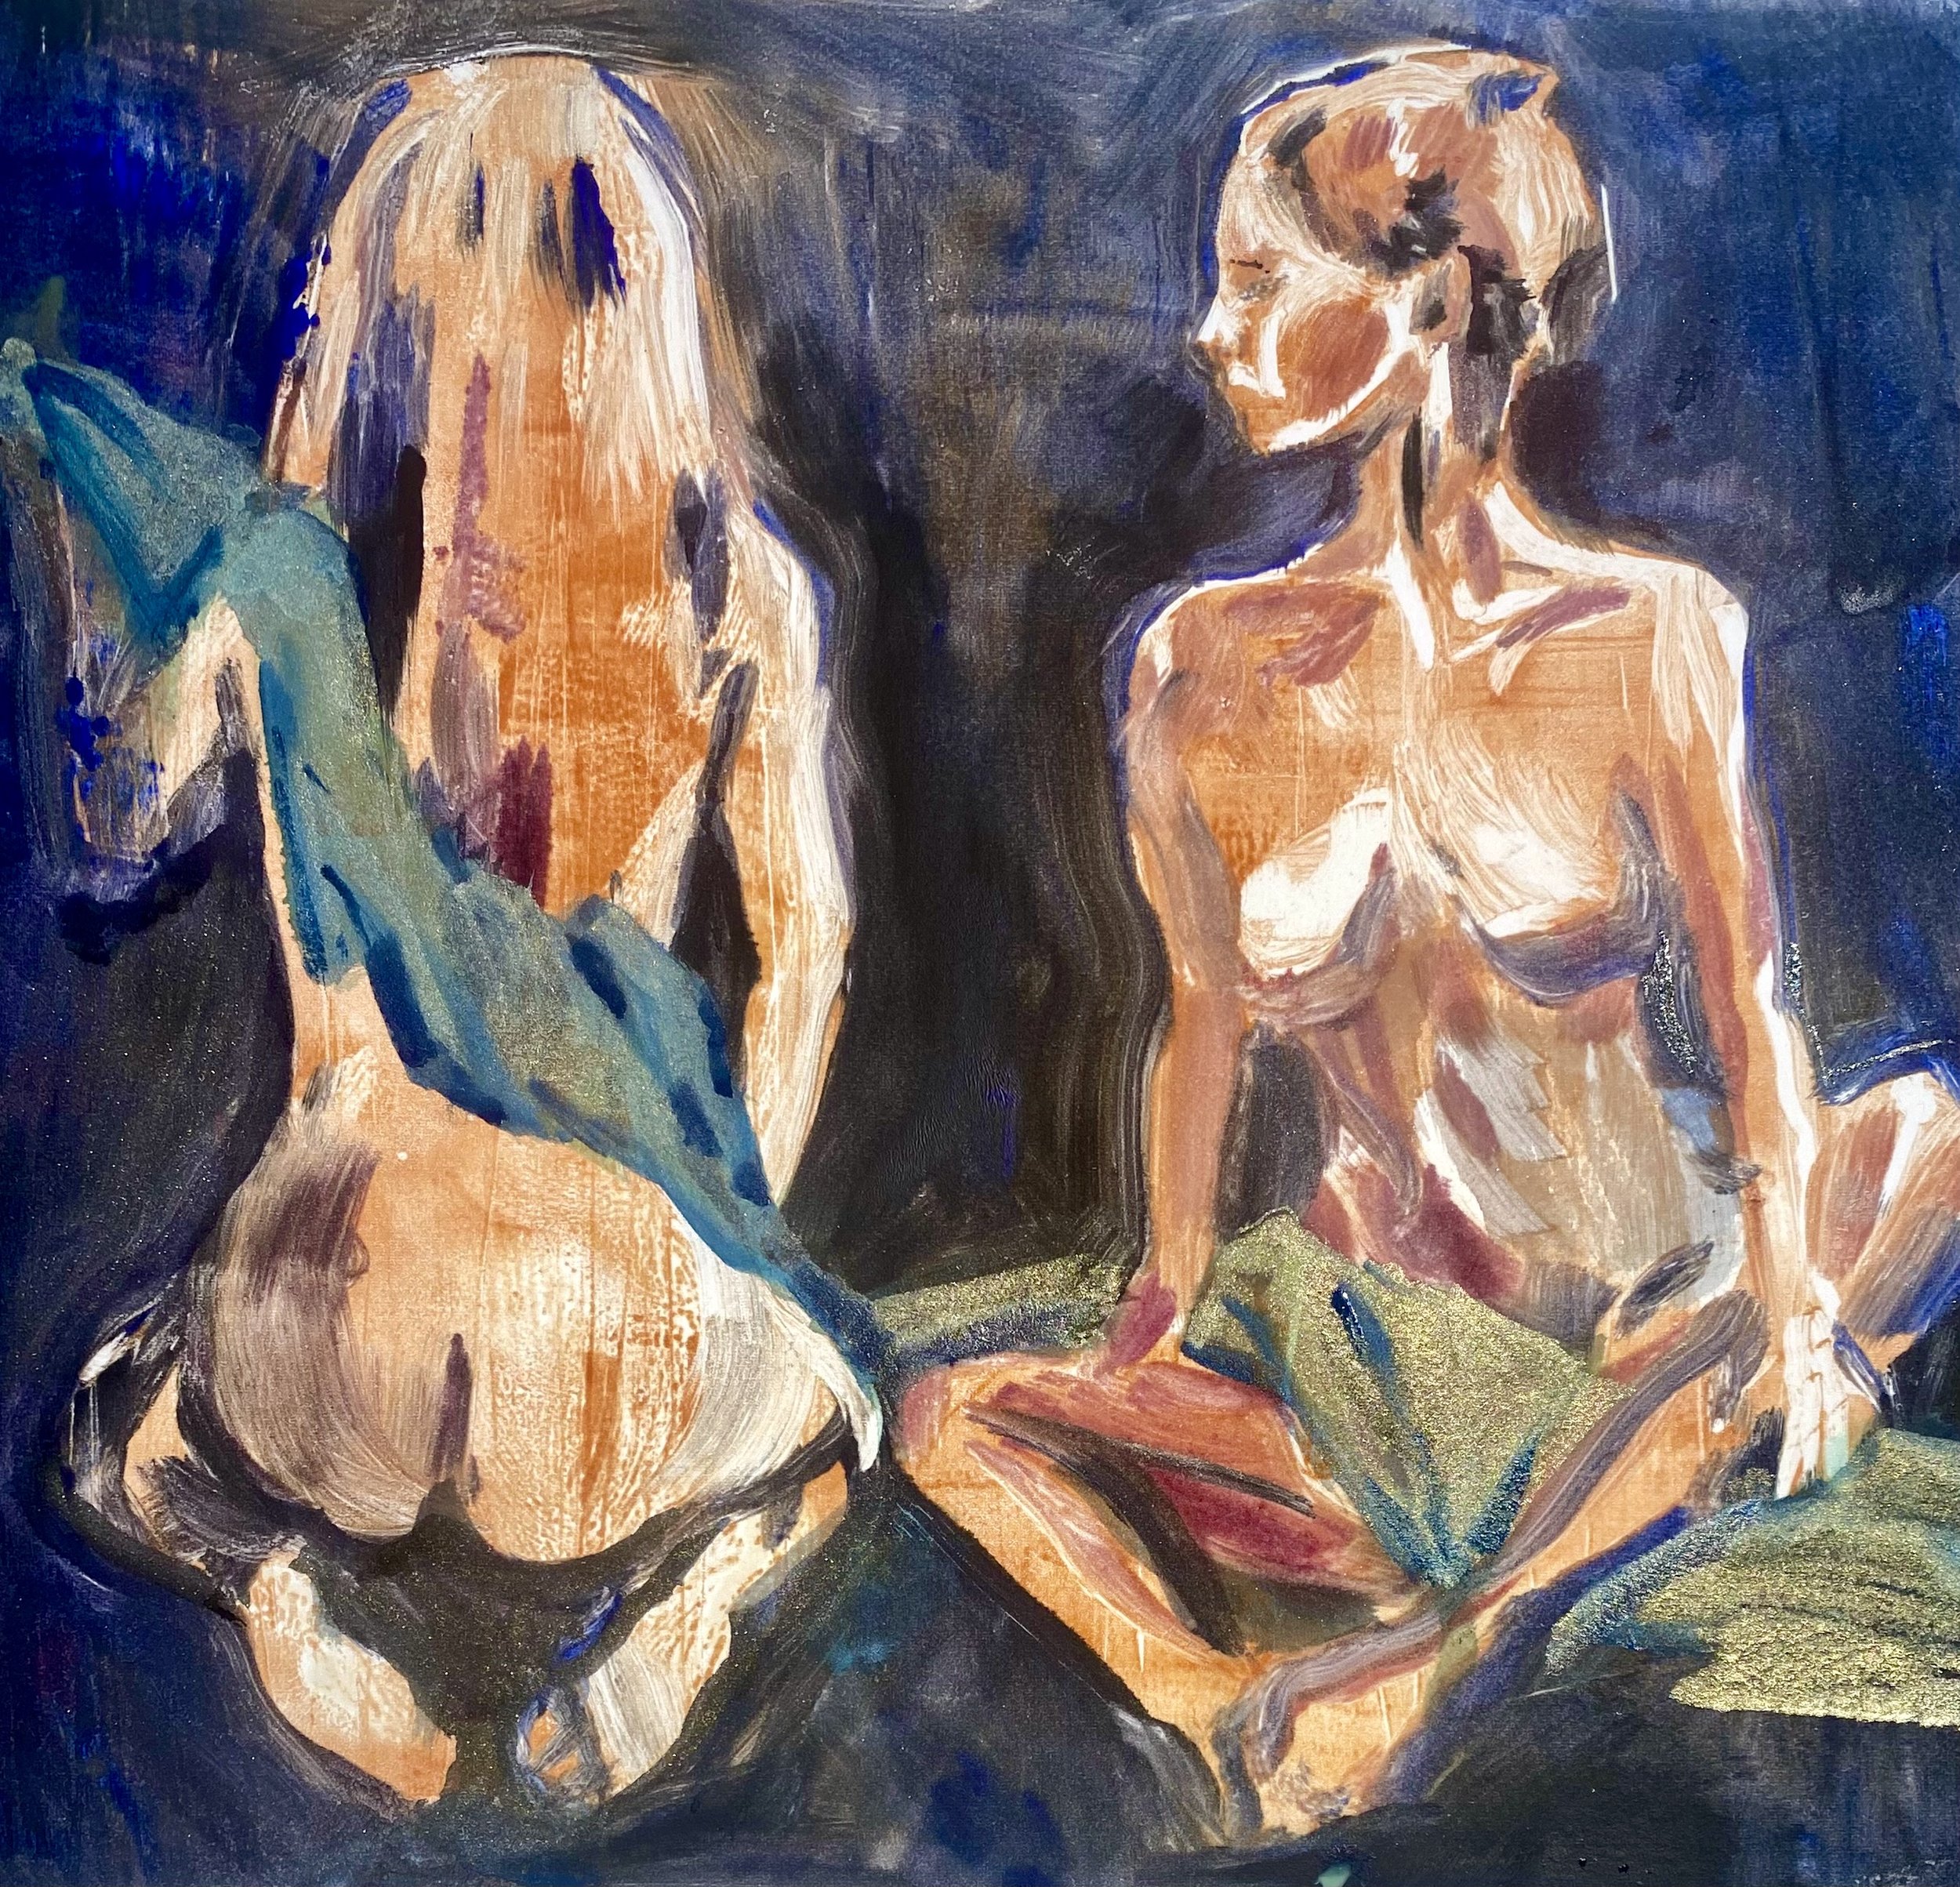 Two Figures with a green scarf, Monotype, 12 inch sq"(1/1)